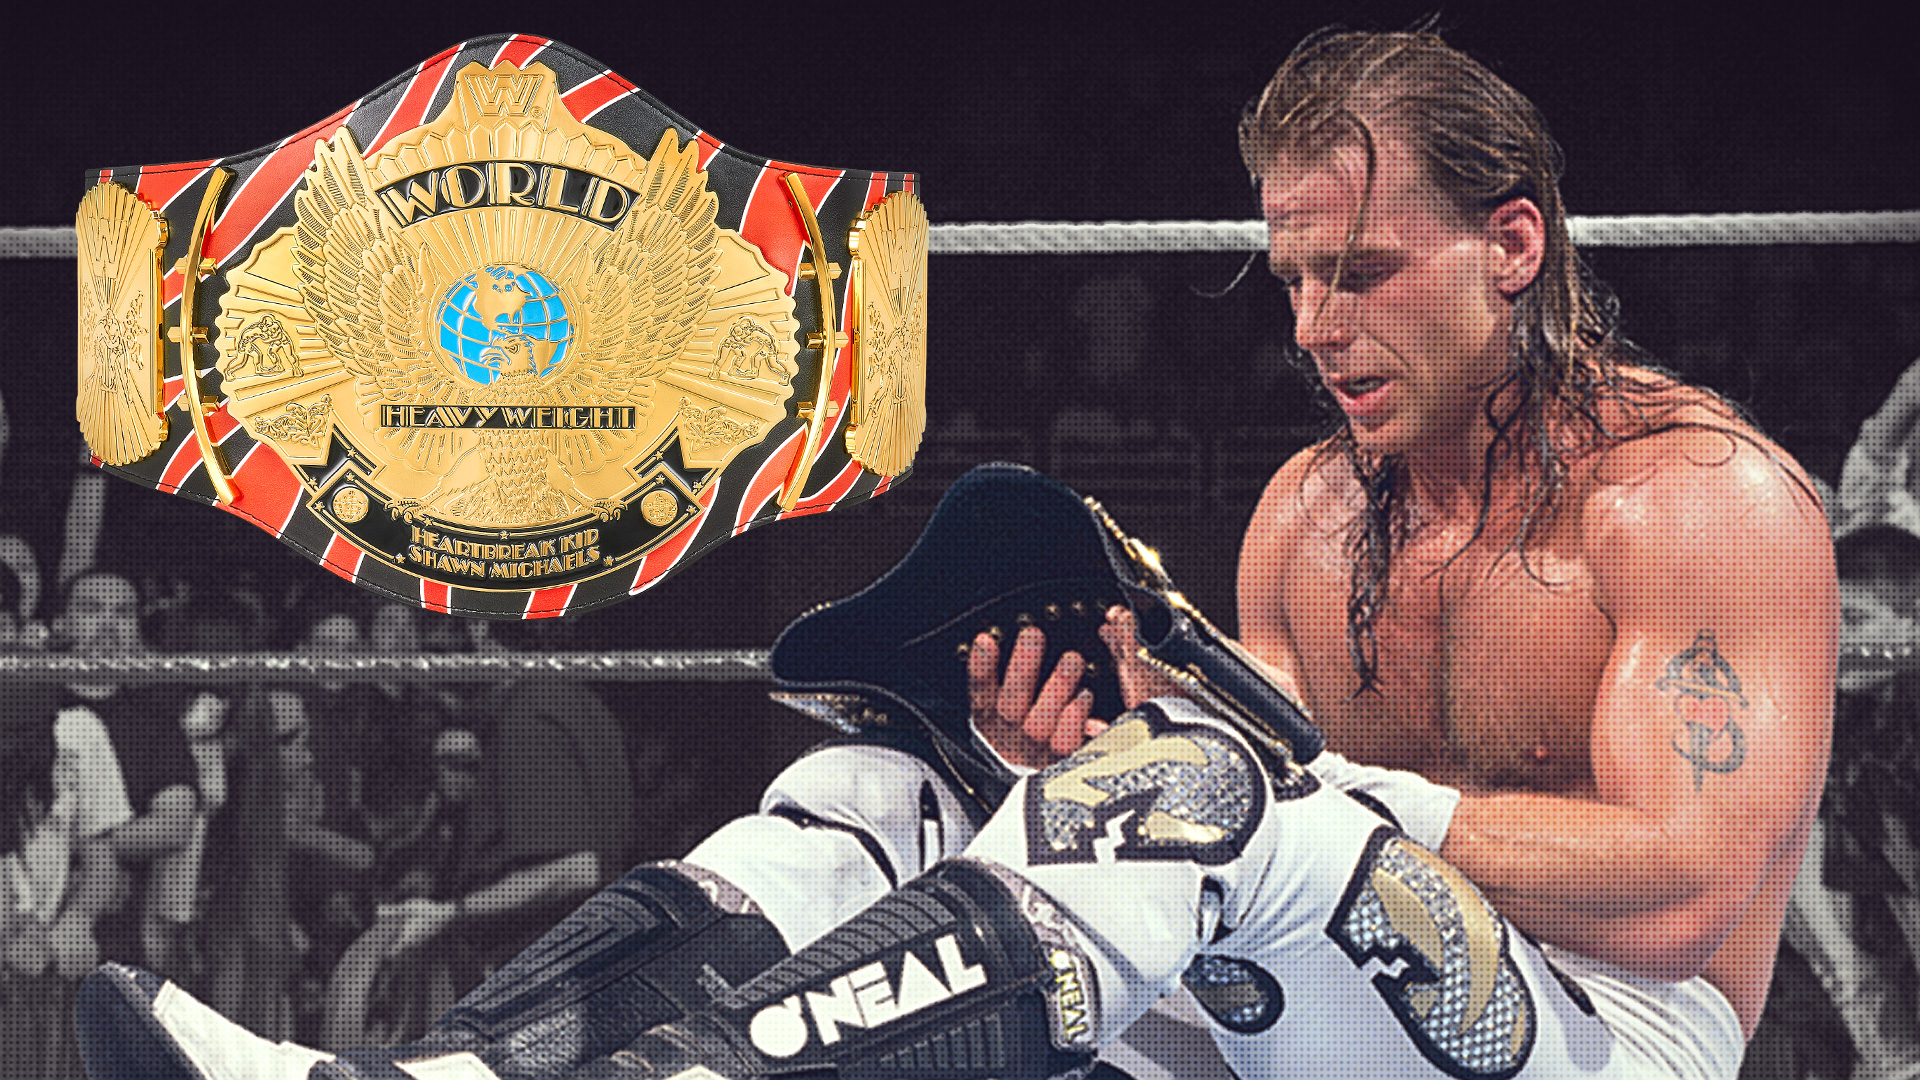 Commemorate Shawn Michaels’ career with new Signature Series Championship